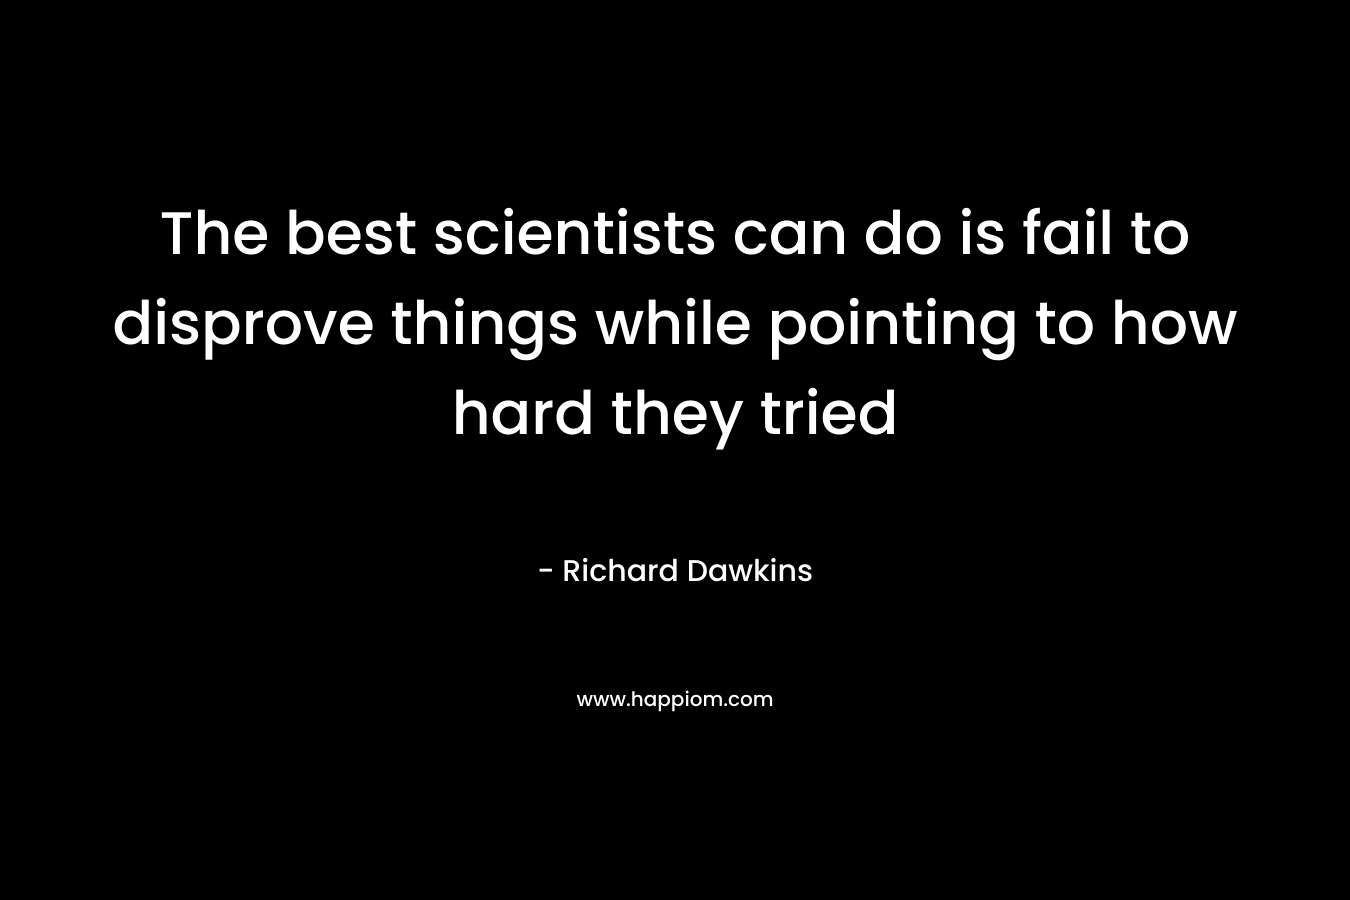 The best scientists can do is fail to disprove things while pointing to how hard they tried – Richard Dawkins